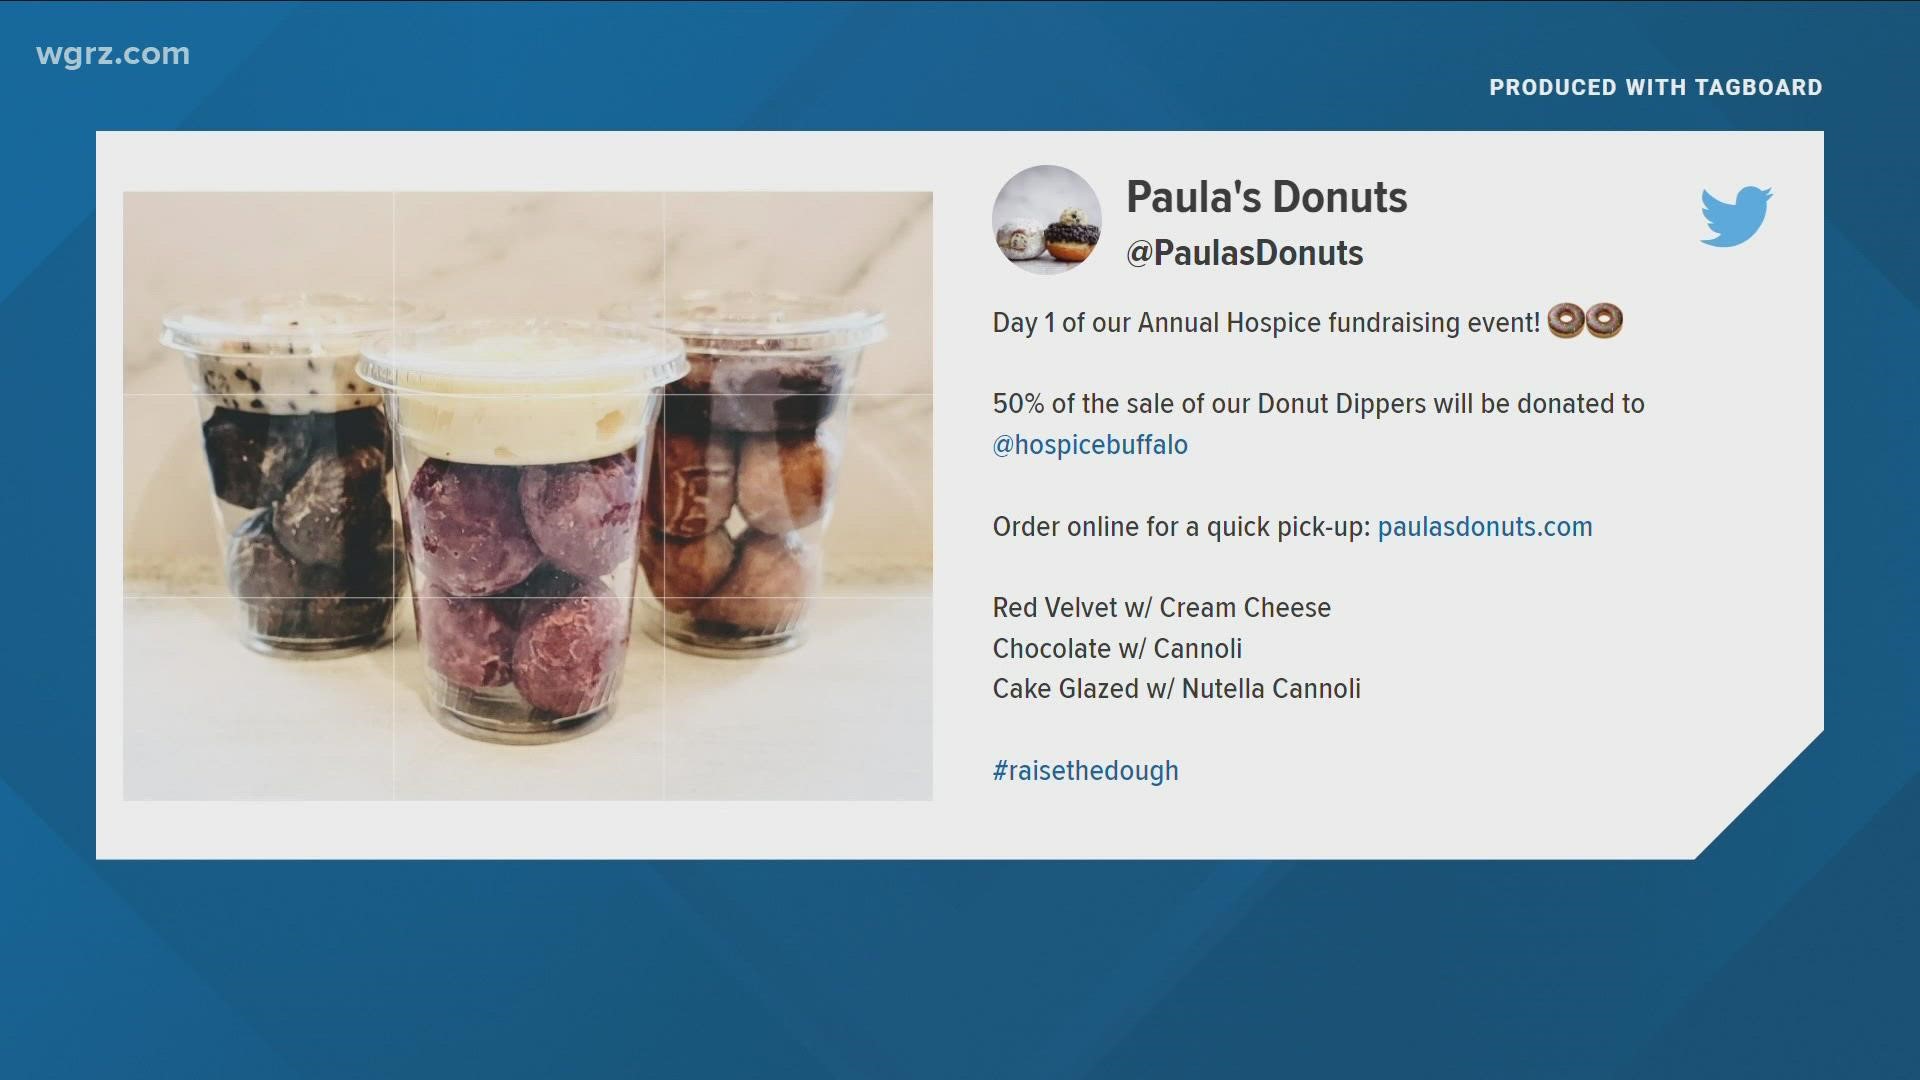 A portion of sales of the donut shop's donut dippers will benefit Hospice and Palliative Care Buffalo